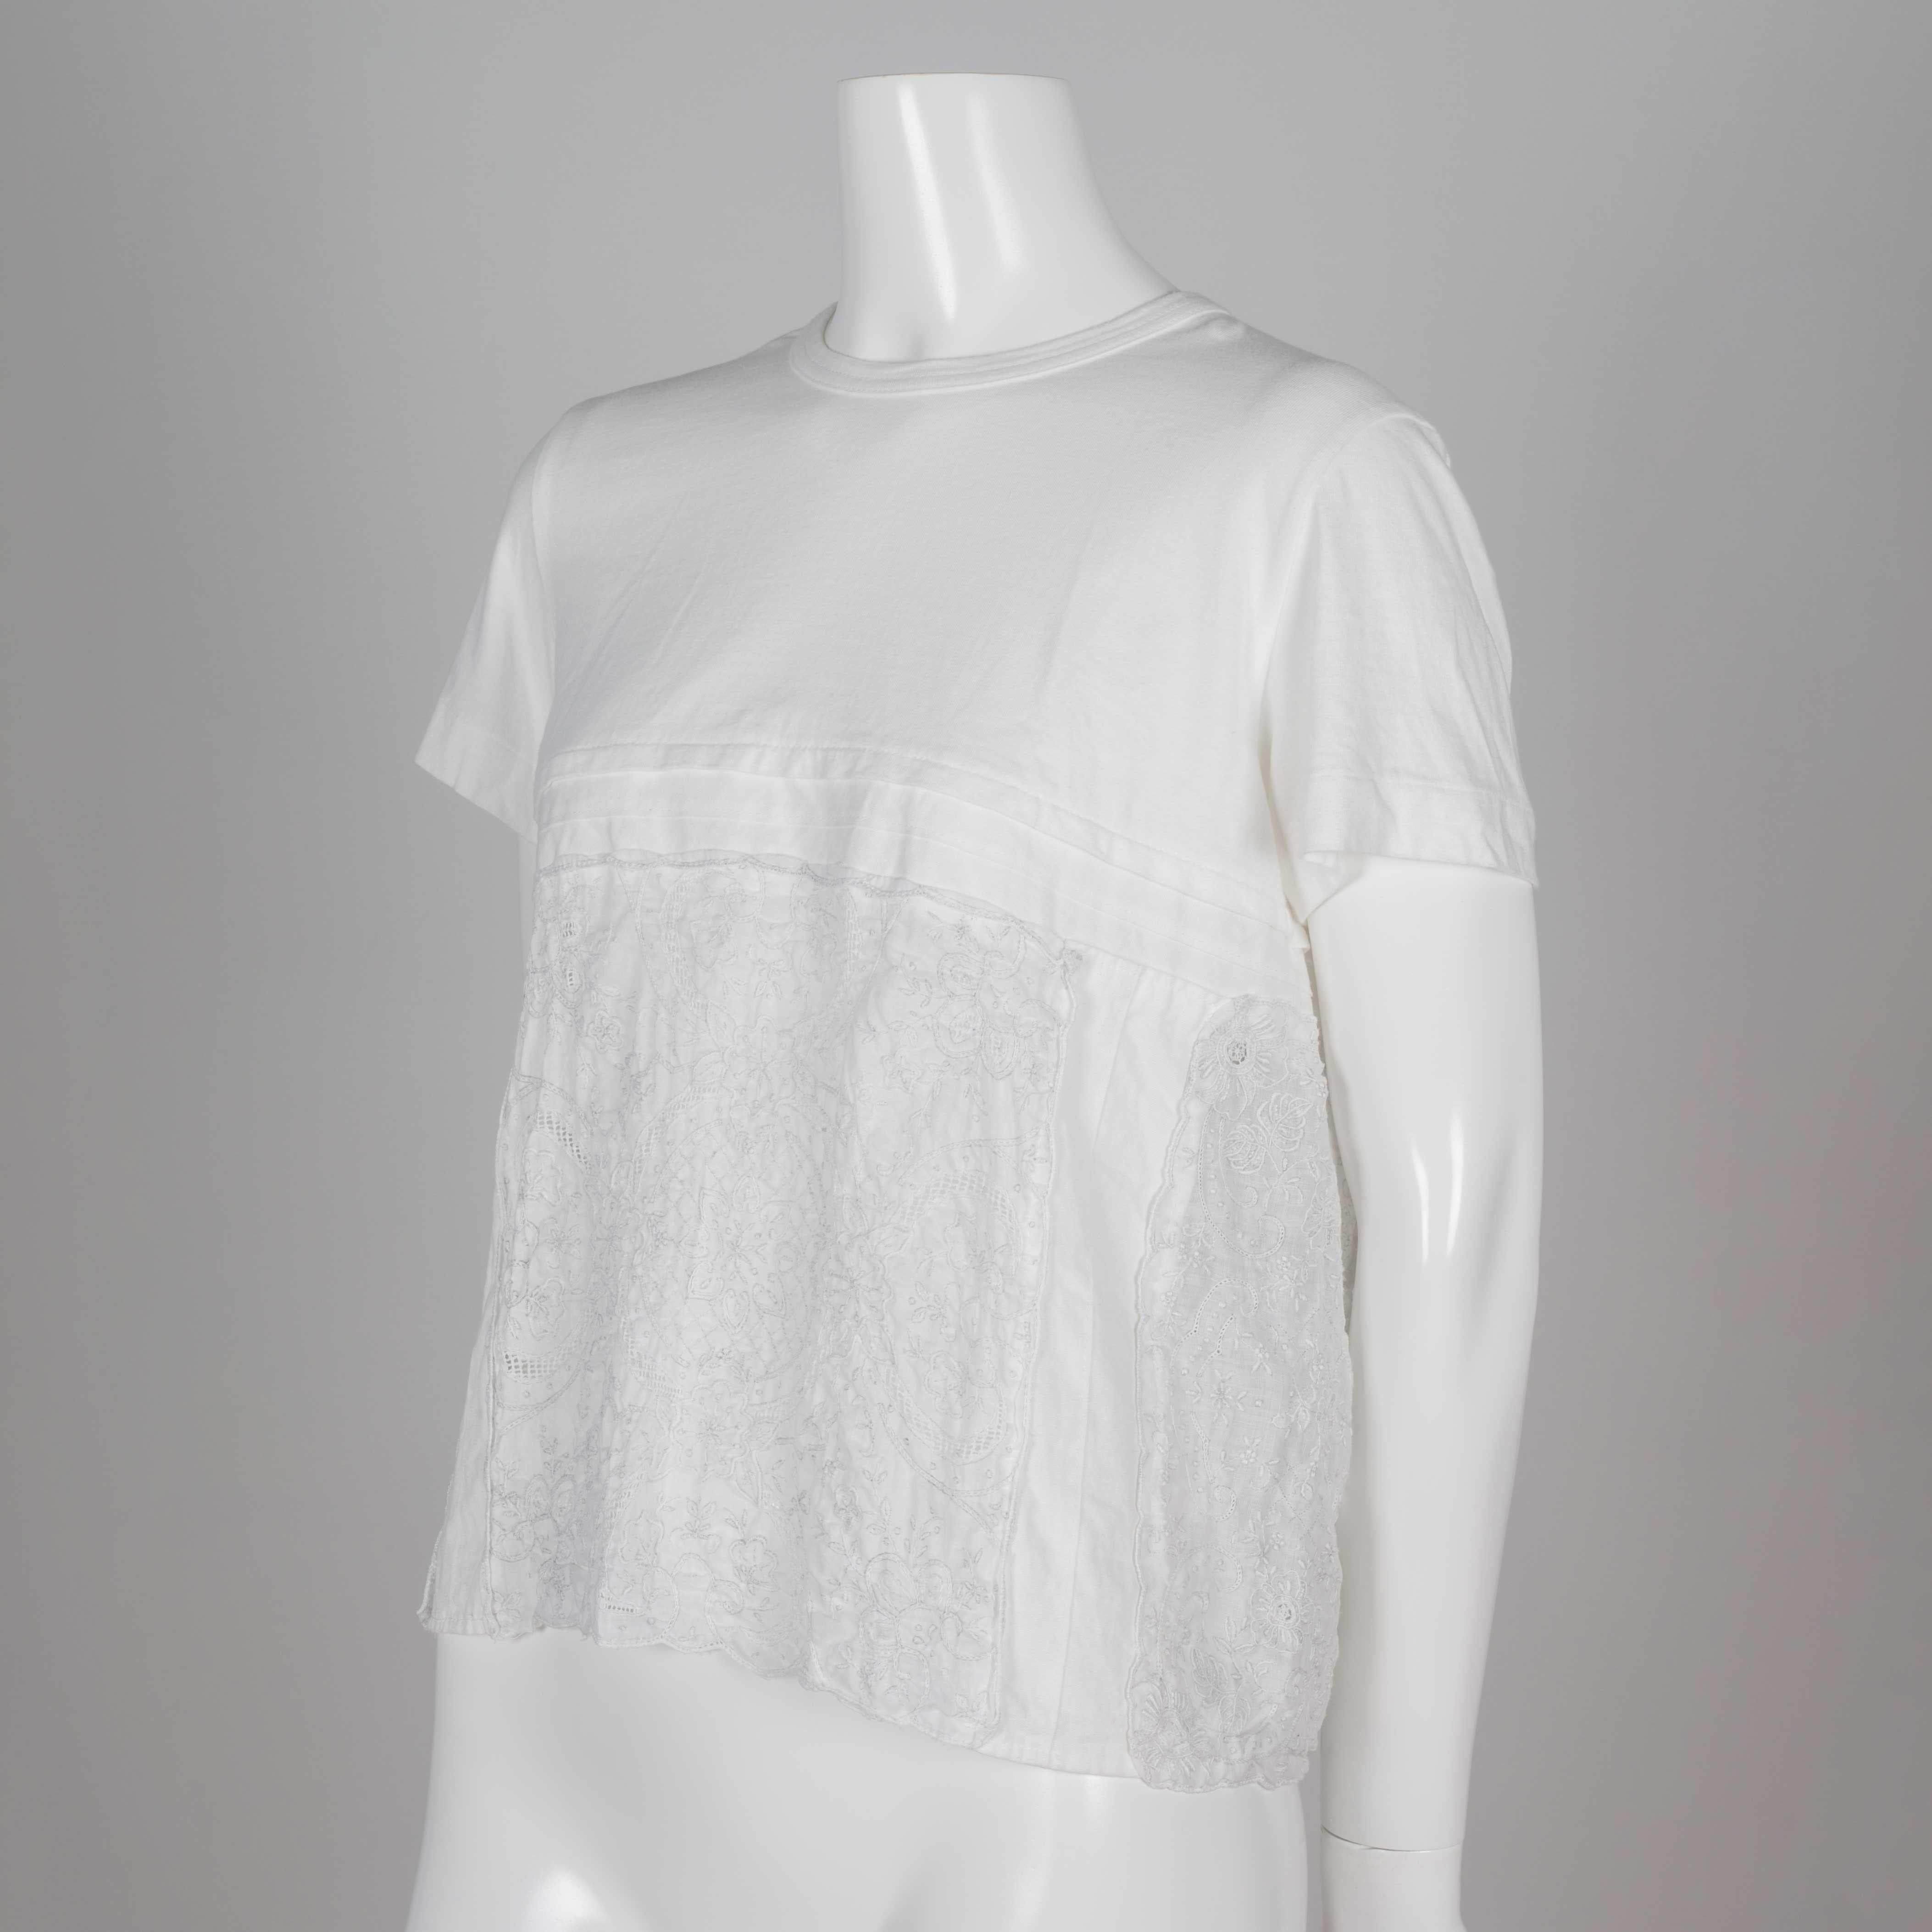 Comme des Garçons Tao light, breezy white t-shirt from Japan with cotton upper and embroidered linen lower that gives an effect of lace. Buttons line the cotton back of the top, and the linen lower back is open. Perfect casual, soft tee with lacy